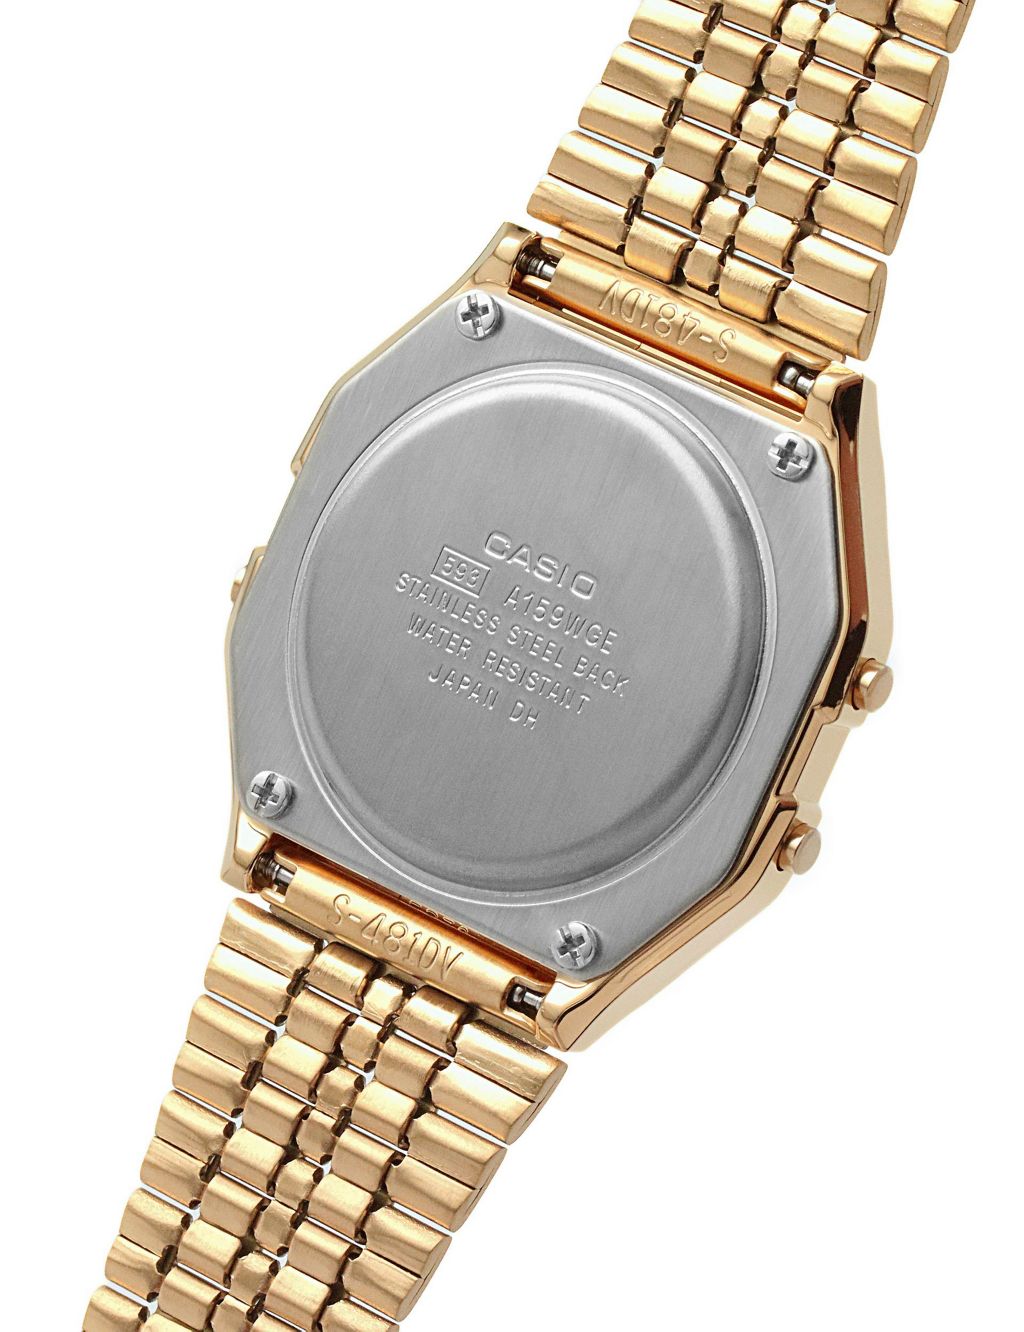 Casio Gold Stainless Steel Chronograph Watch image 4